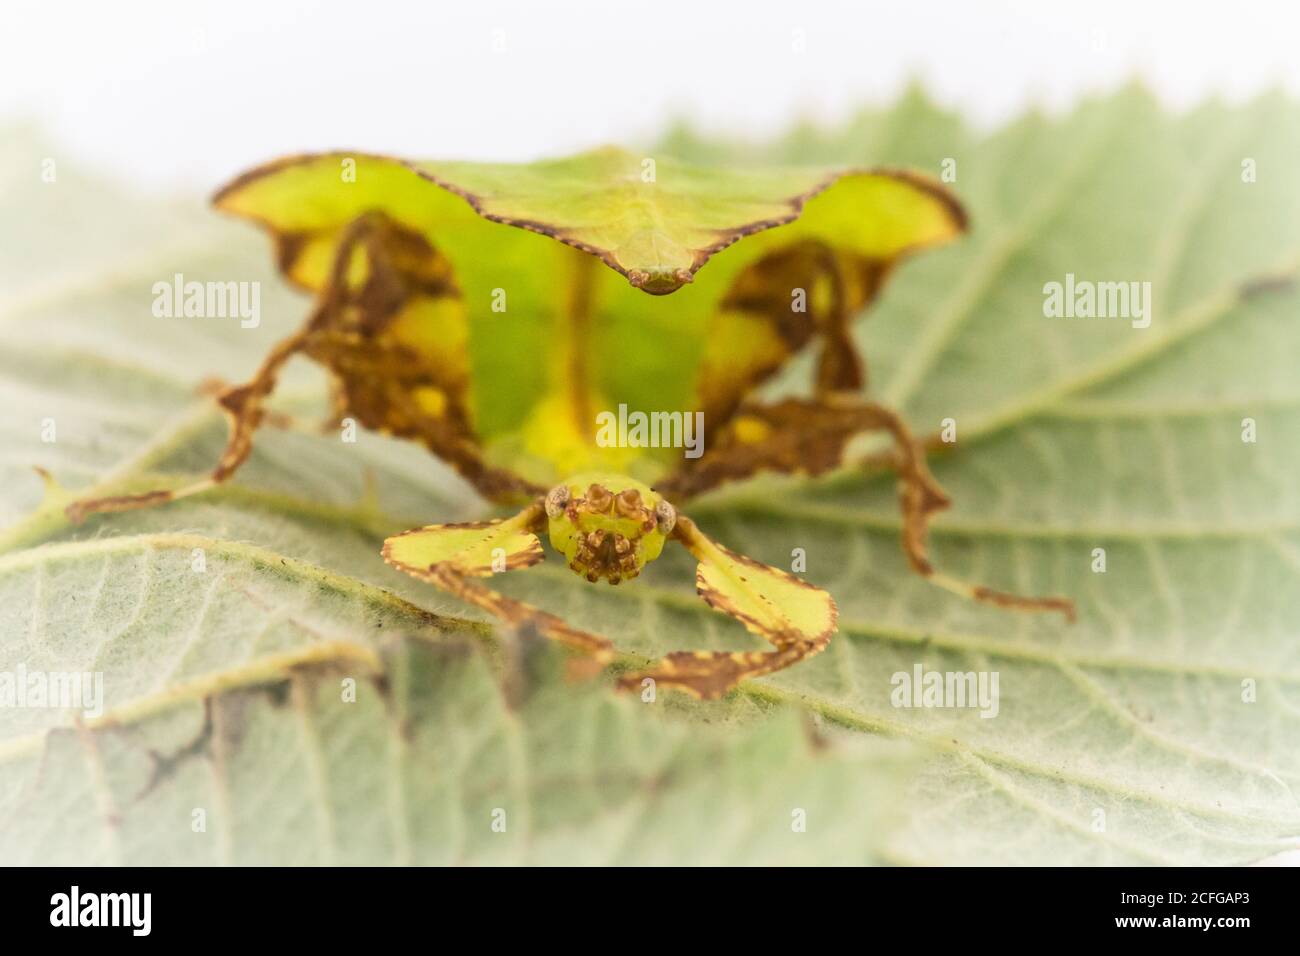 The juvenille giant leaf insect (Phyllium giganteum) tries to hide against the leaf Stock Photo